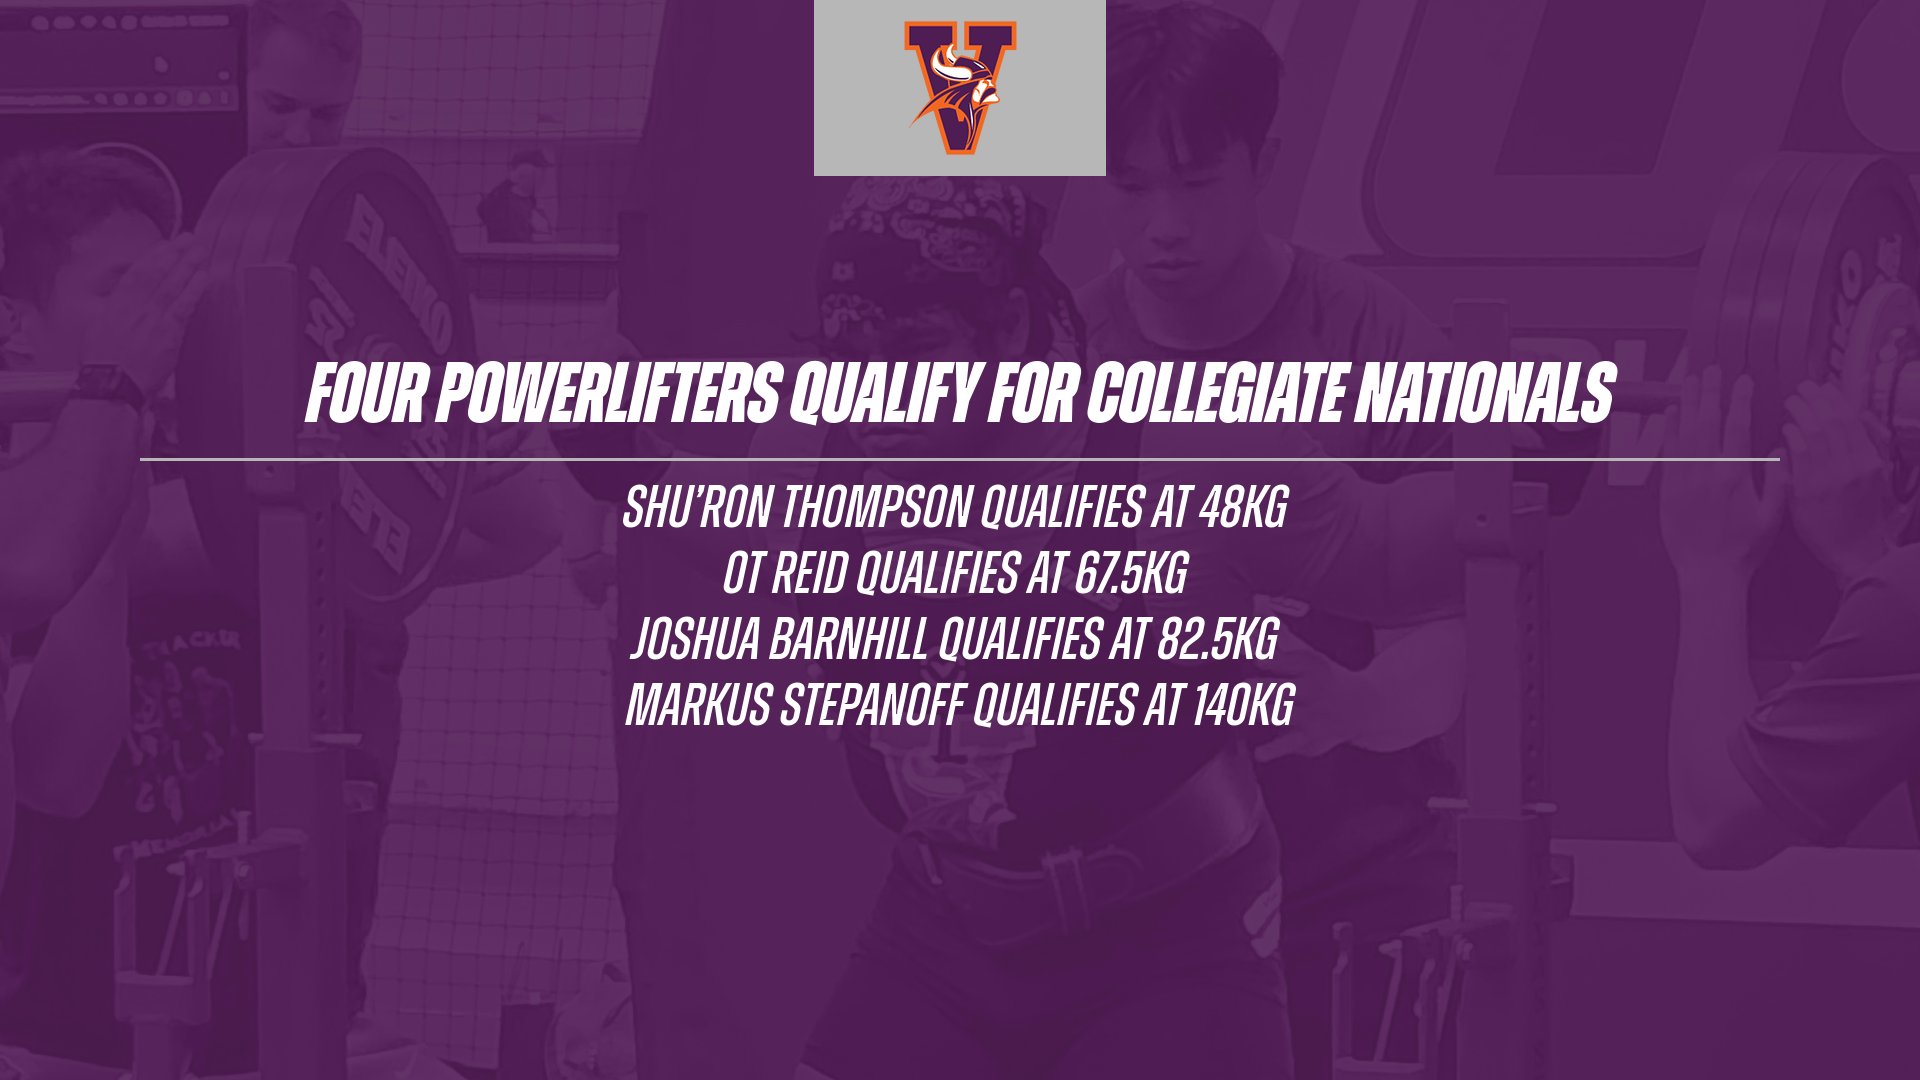 MISSOURI VALLEY COLLEGE POWERLIFTING TEAMS COMPETE AT MIDWEST COLLEGIATE REGIONALS